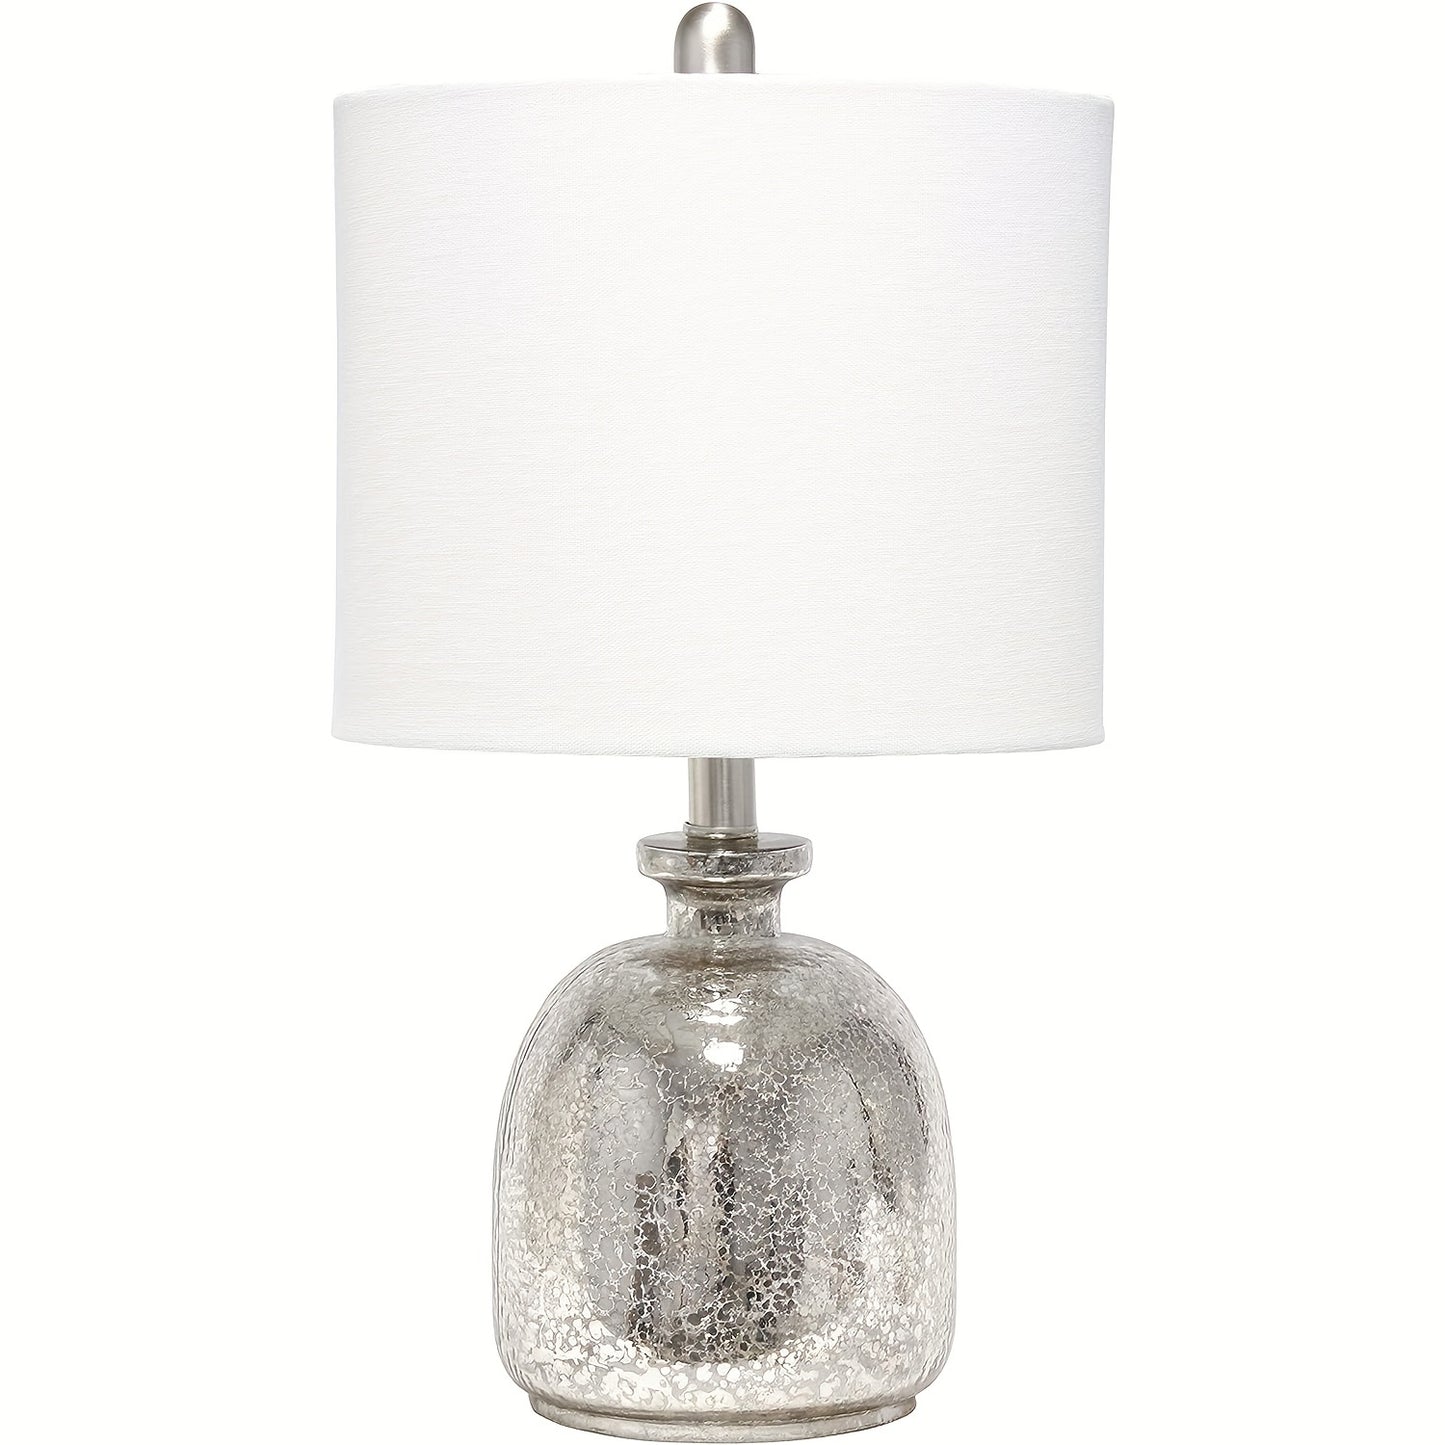 Glass Table Lamp with Off-White Round Linen Lampshade, 11 x 20 Inch, 4 Colors